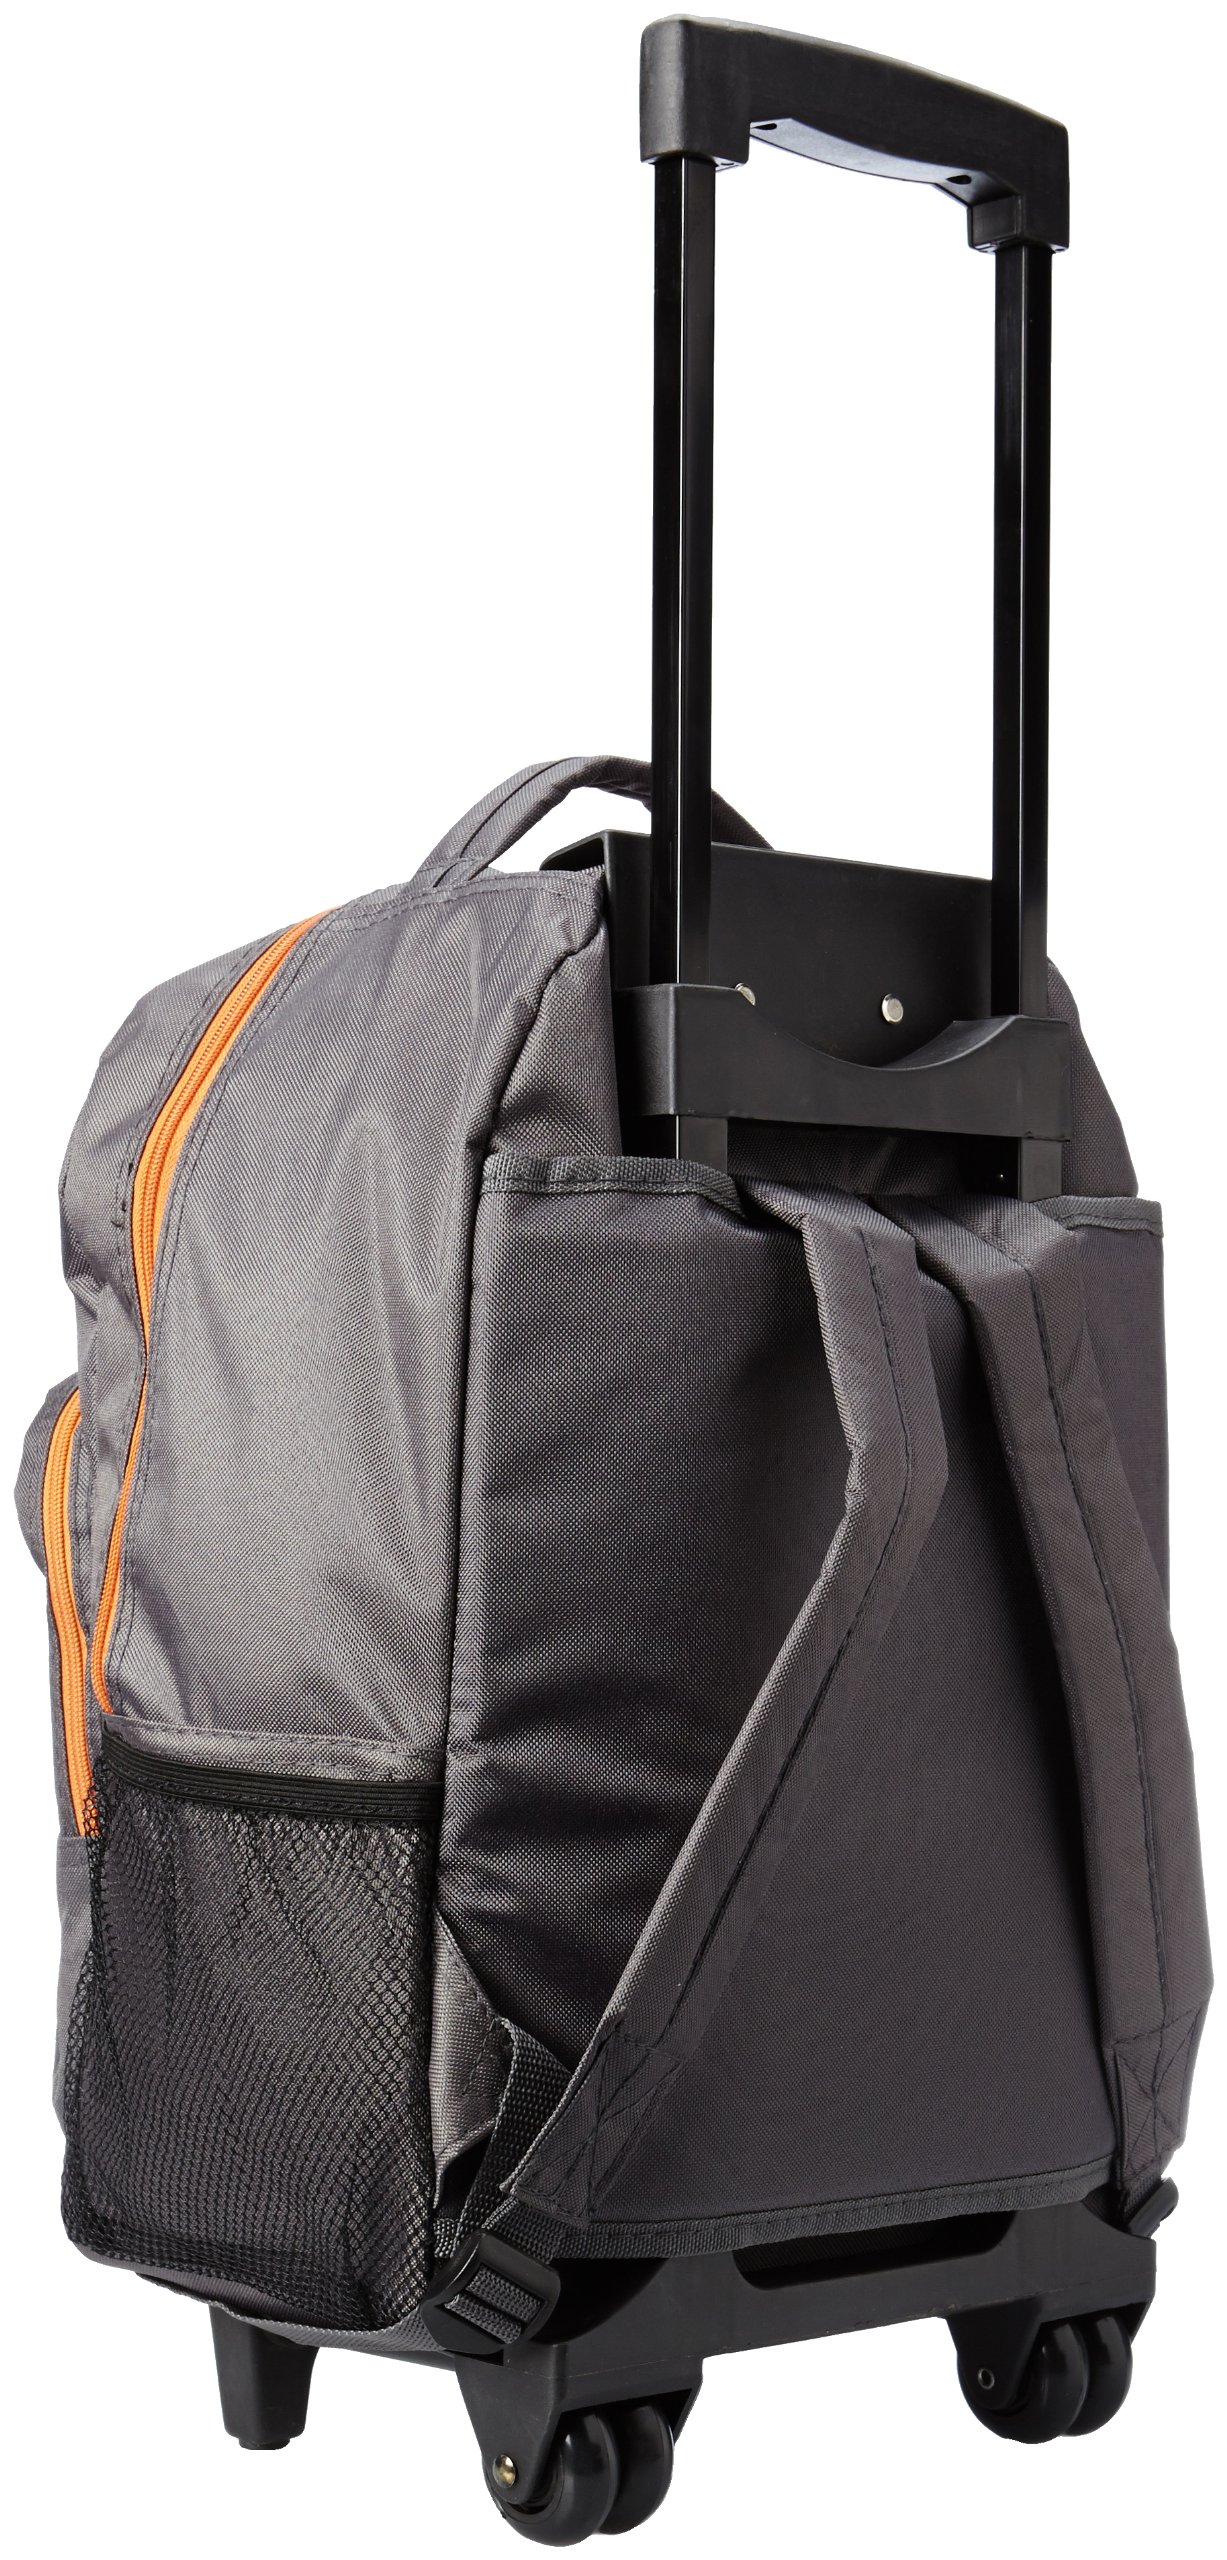 Rockland Double Handle Rolling Backpack, Charcoal, 17-Inch